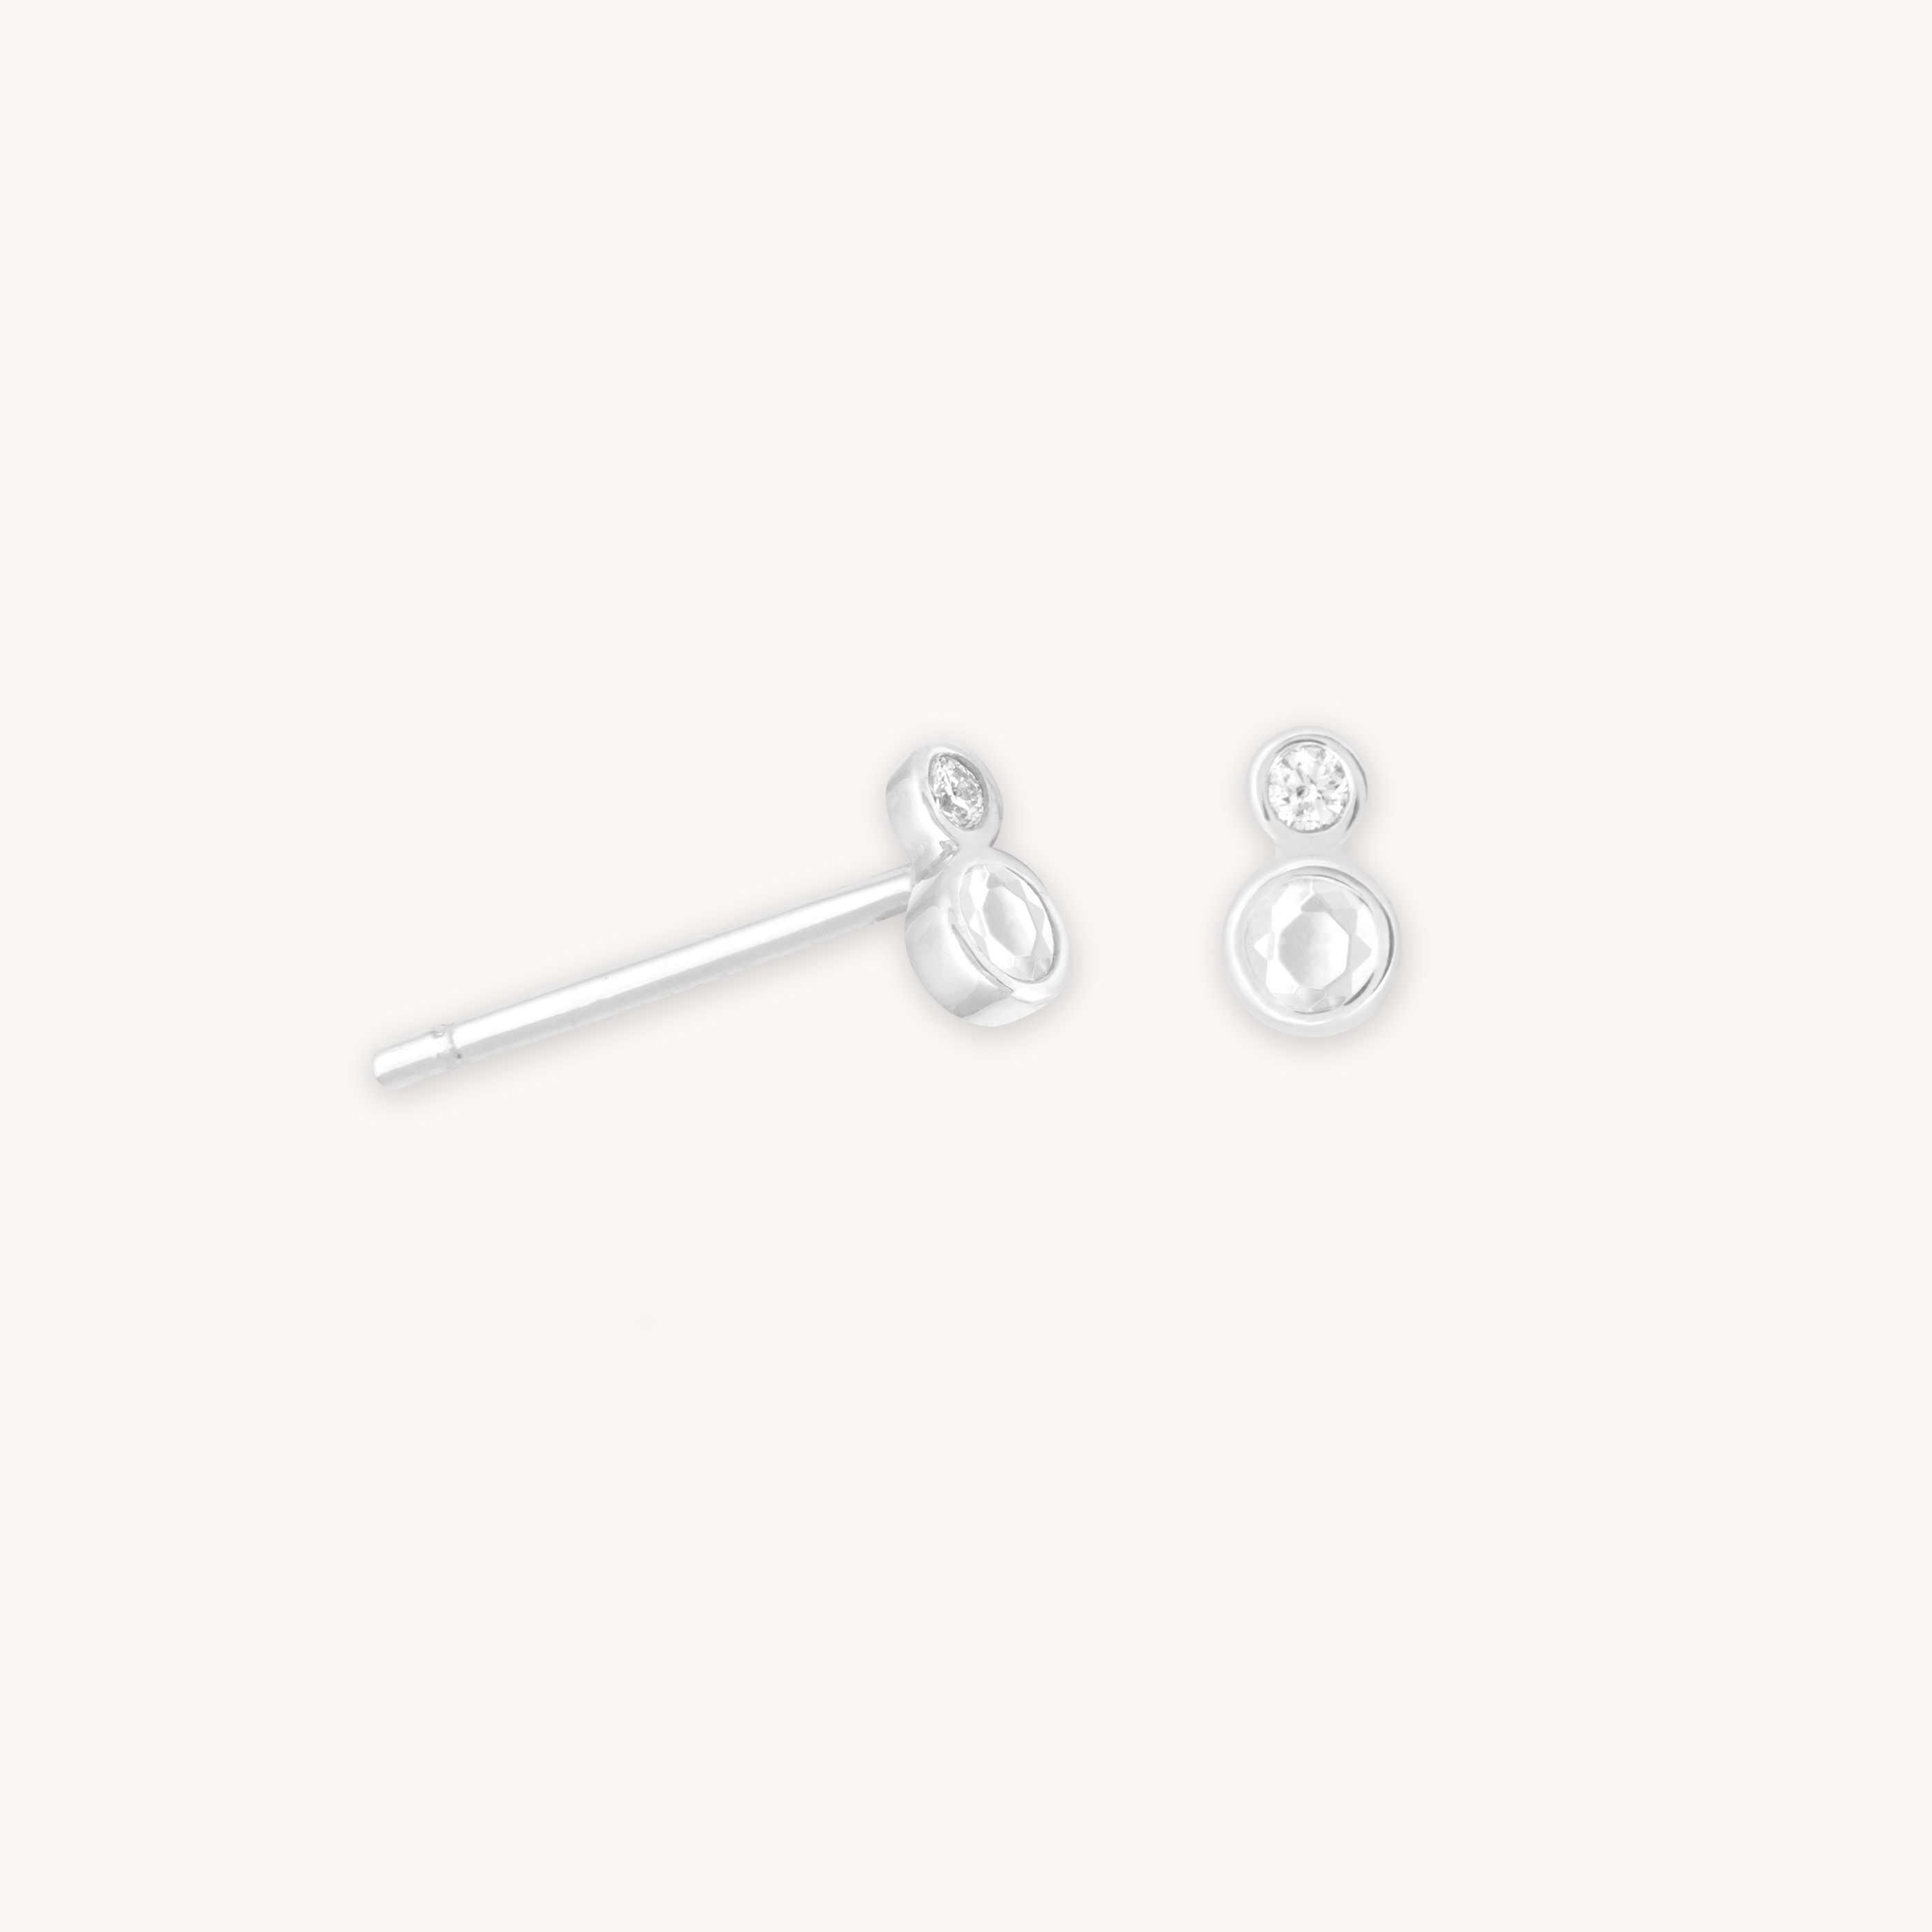 Double Topaz Stud Earrings in Solid White Gold cut out